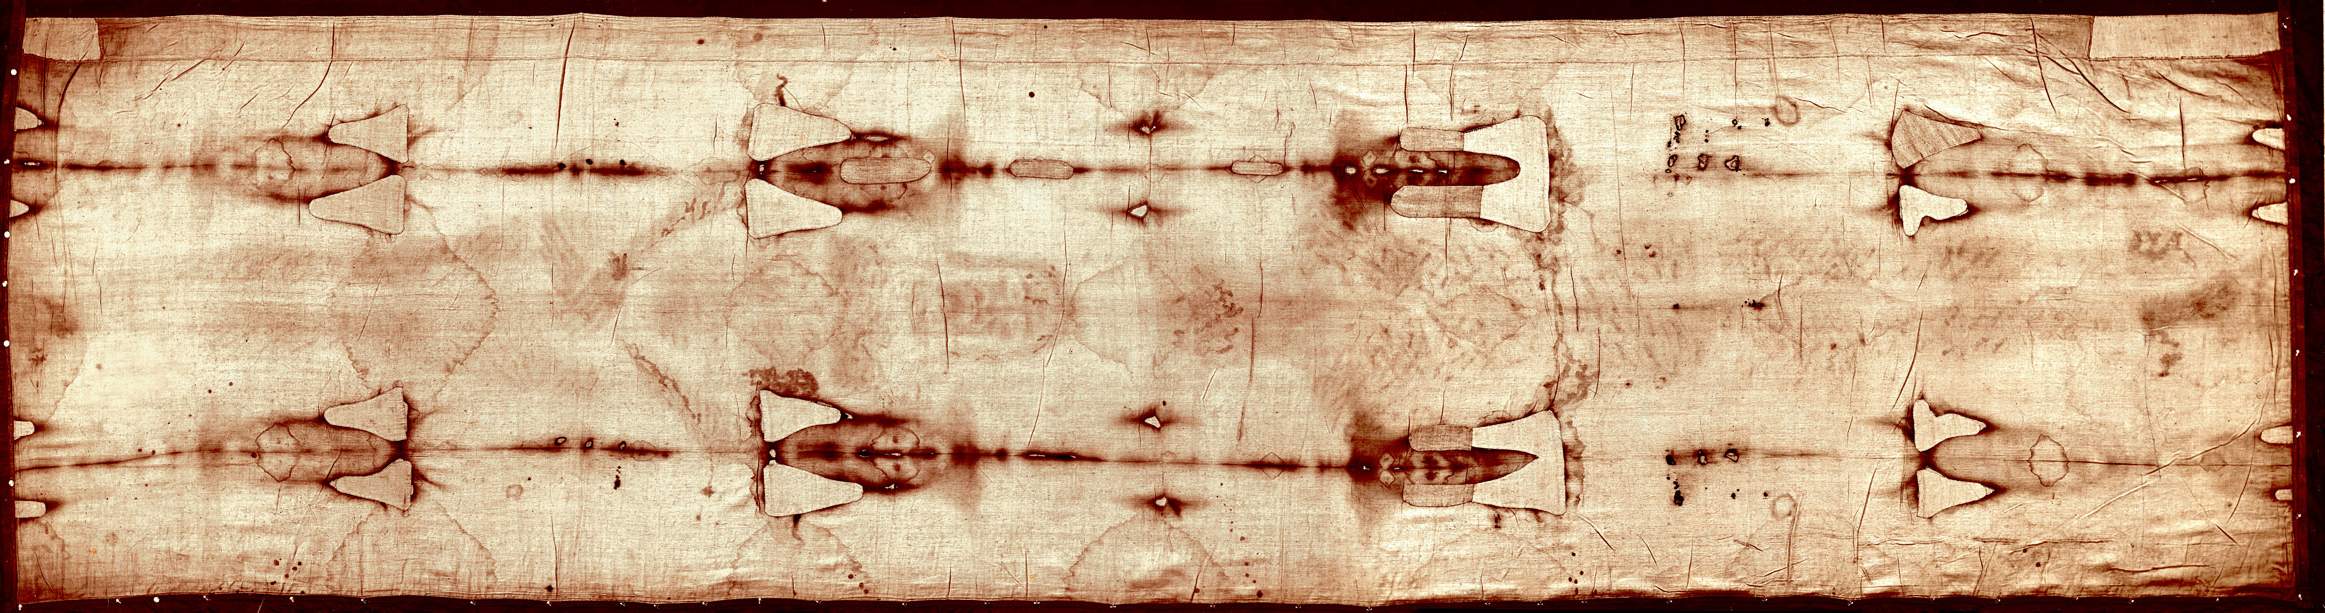 The Shroud of Turin: Some interesting things you should know 2